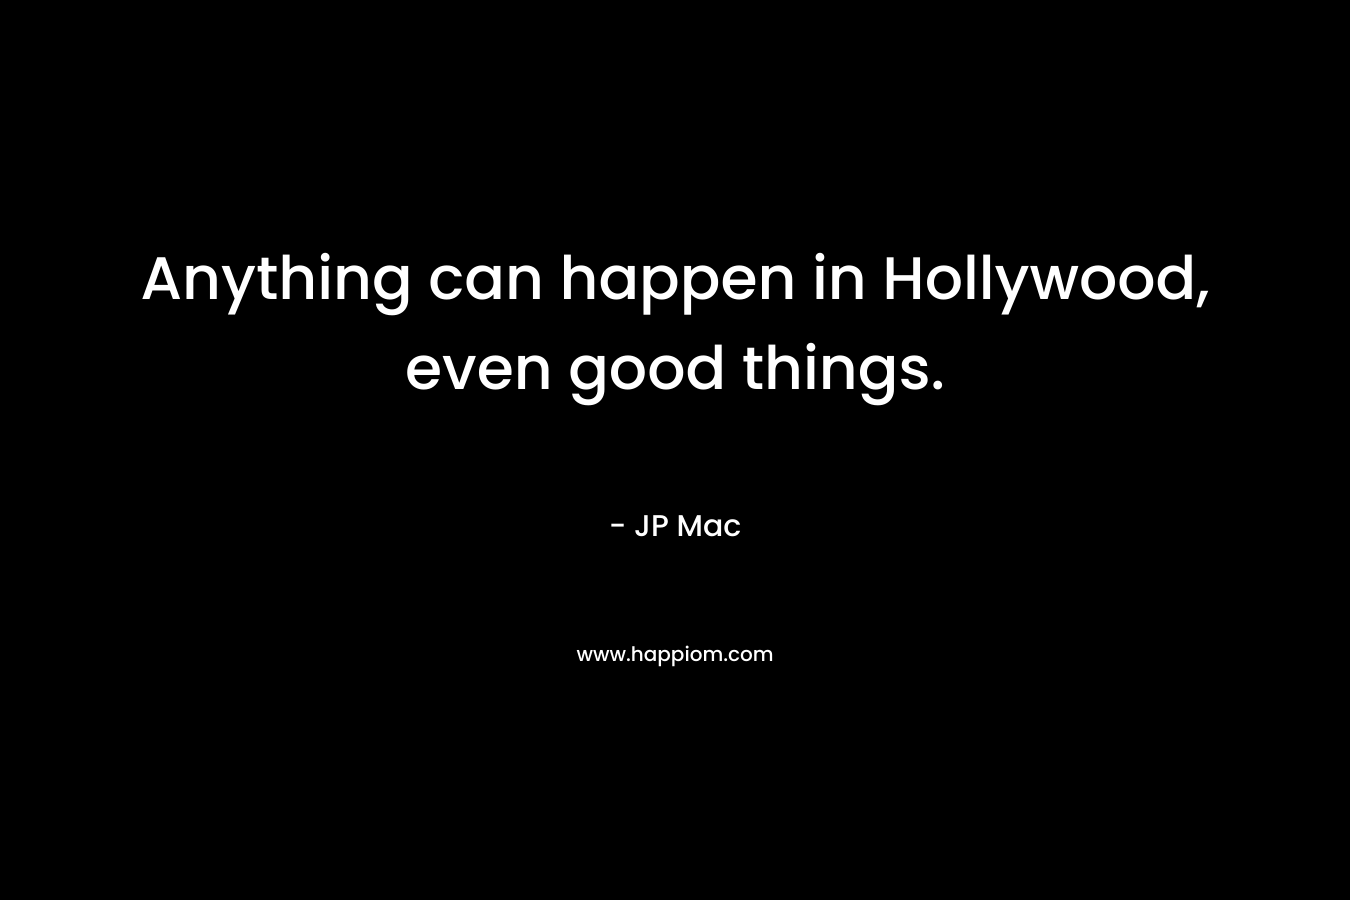 Anything can happen in Hollywood, even good things.